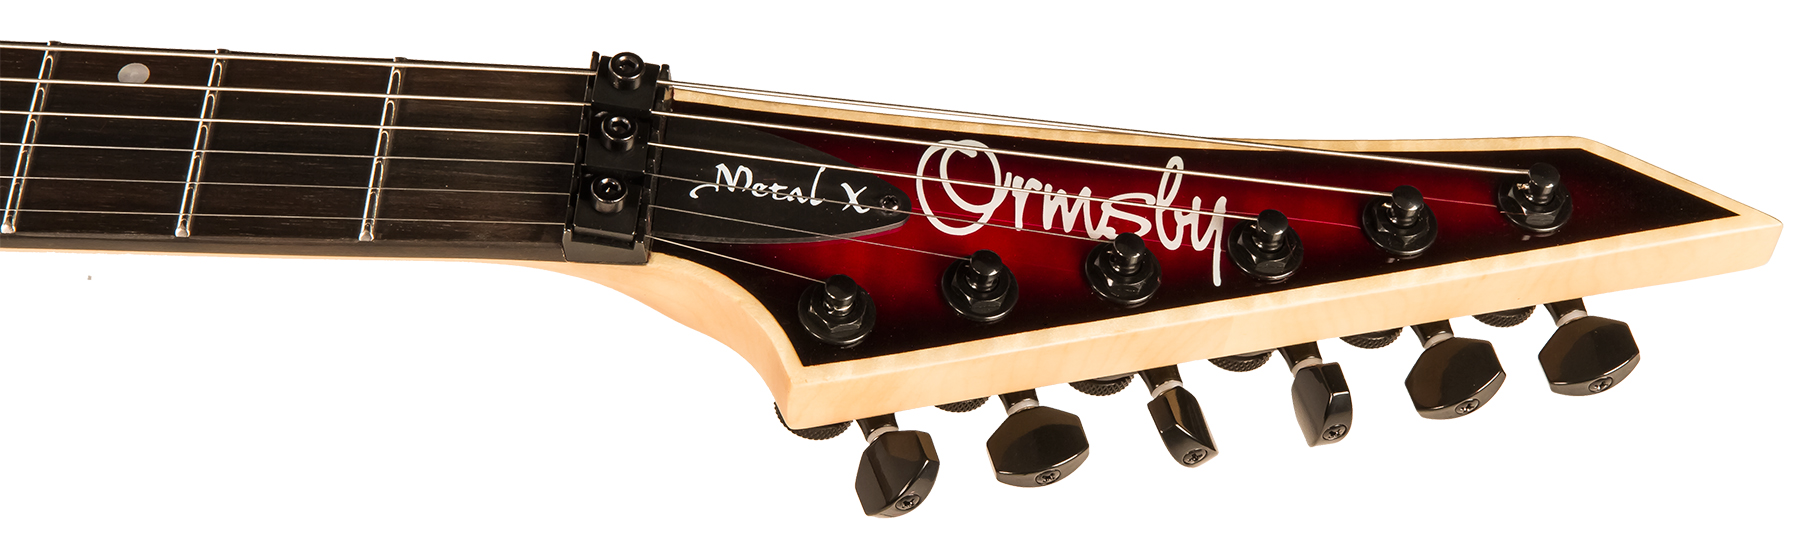 Ormsby Metal X 6 Hh Fr Eb - Red Dead - Metal electric guitar - Variation 4